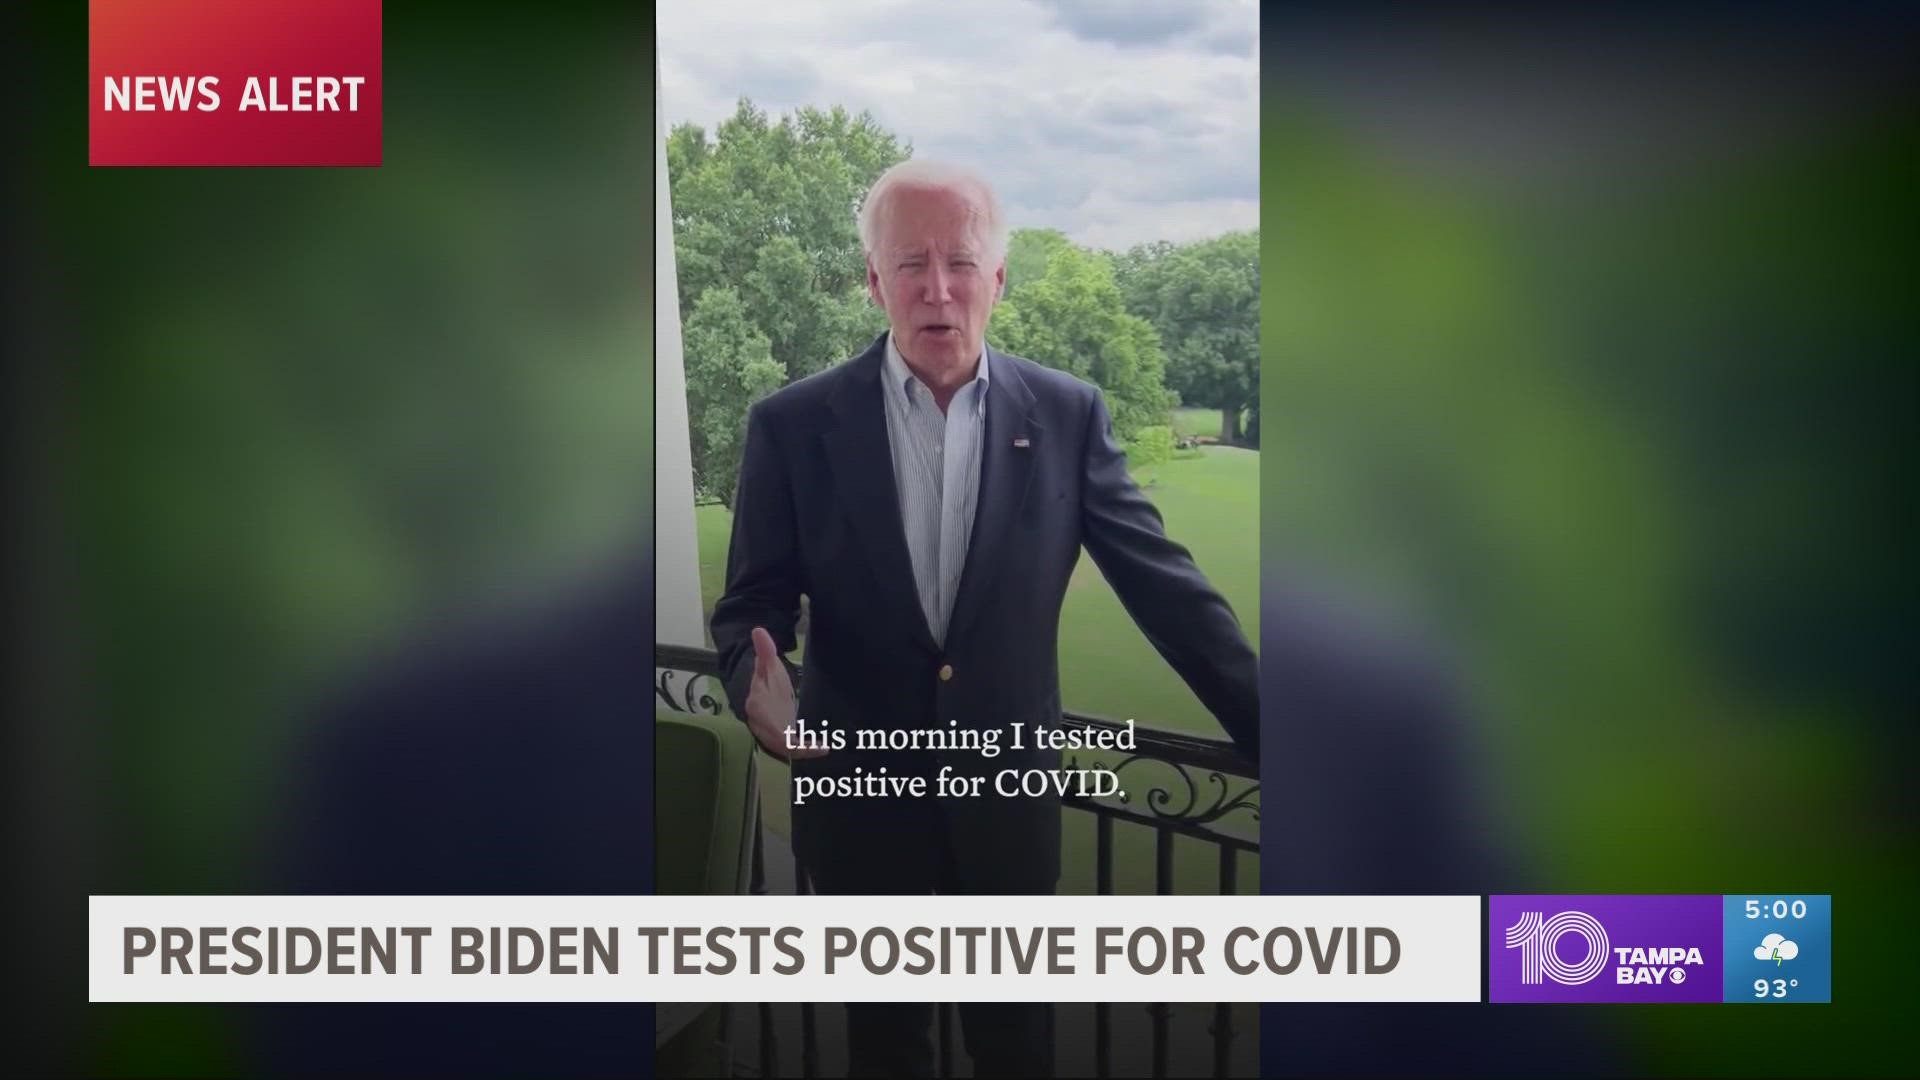 After testing positive for COVID-19, President Biden said in a video that he's "doing well" and "getting a lot of work done."